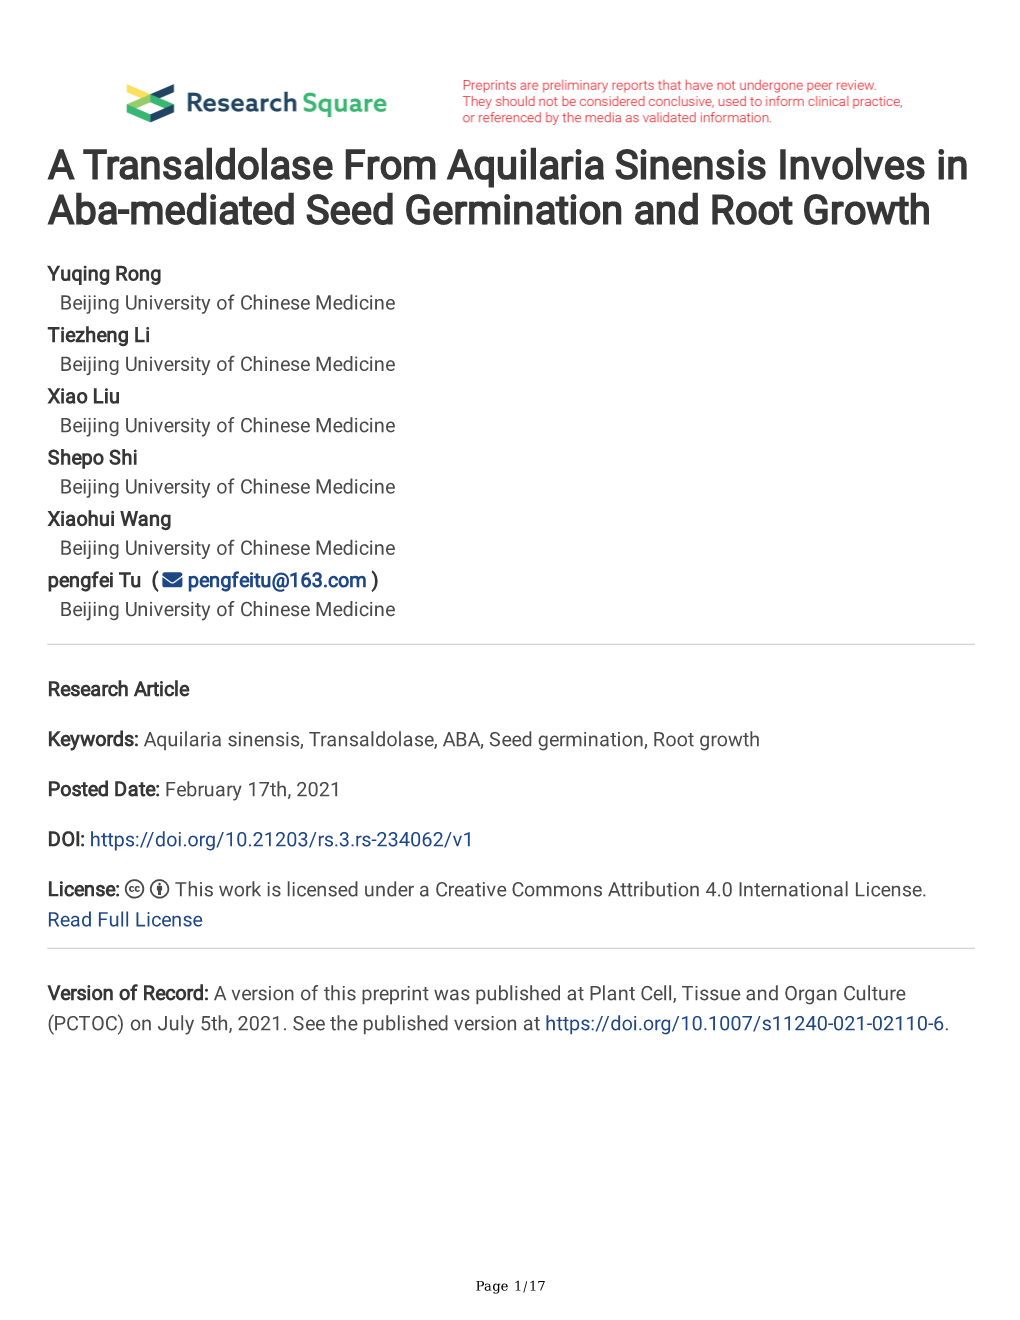 A Transaldolase from Aquilaria Sinensis Involves in Aba-Mediated Seed Germination and Root Growth